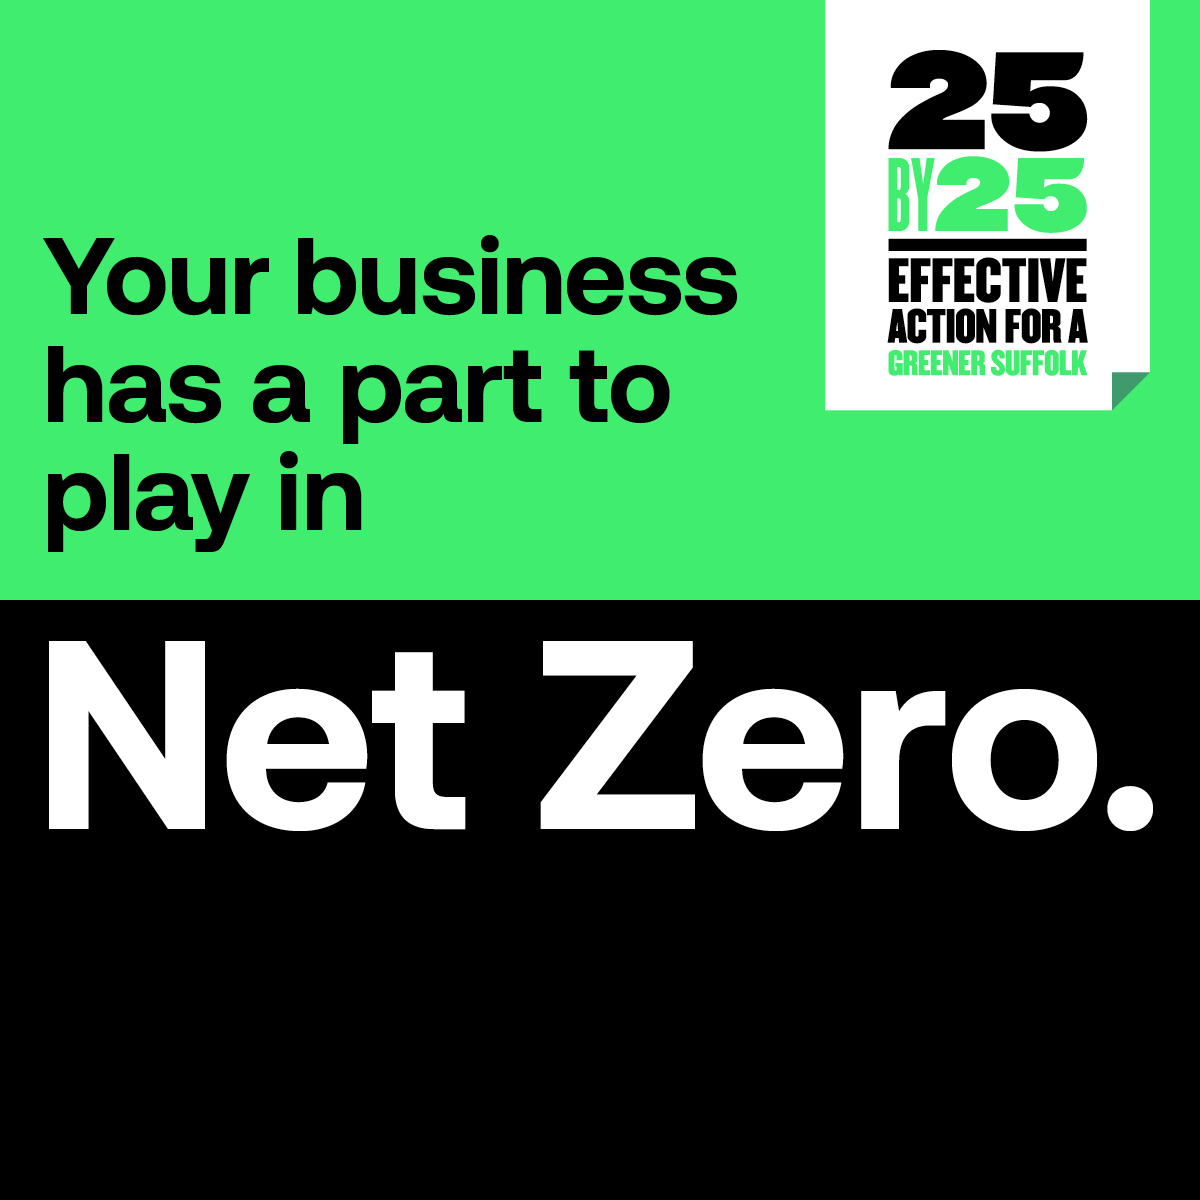 Green and black square that says 'your business has a part to play in Net Zero'.